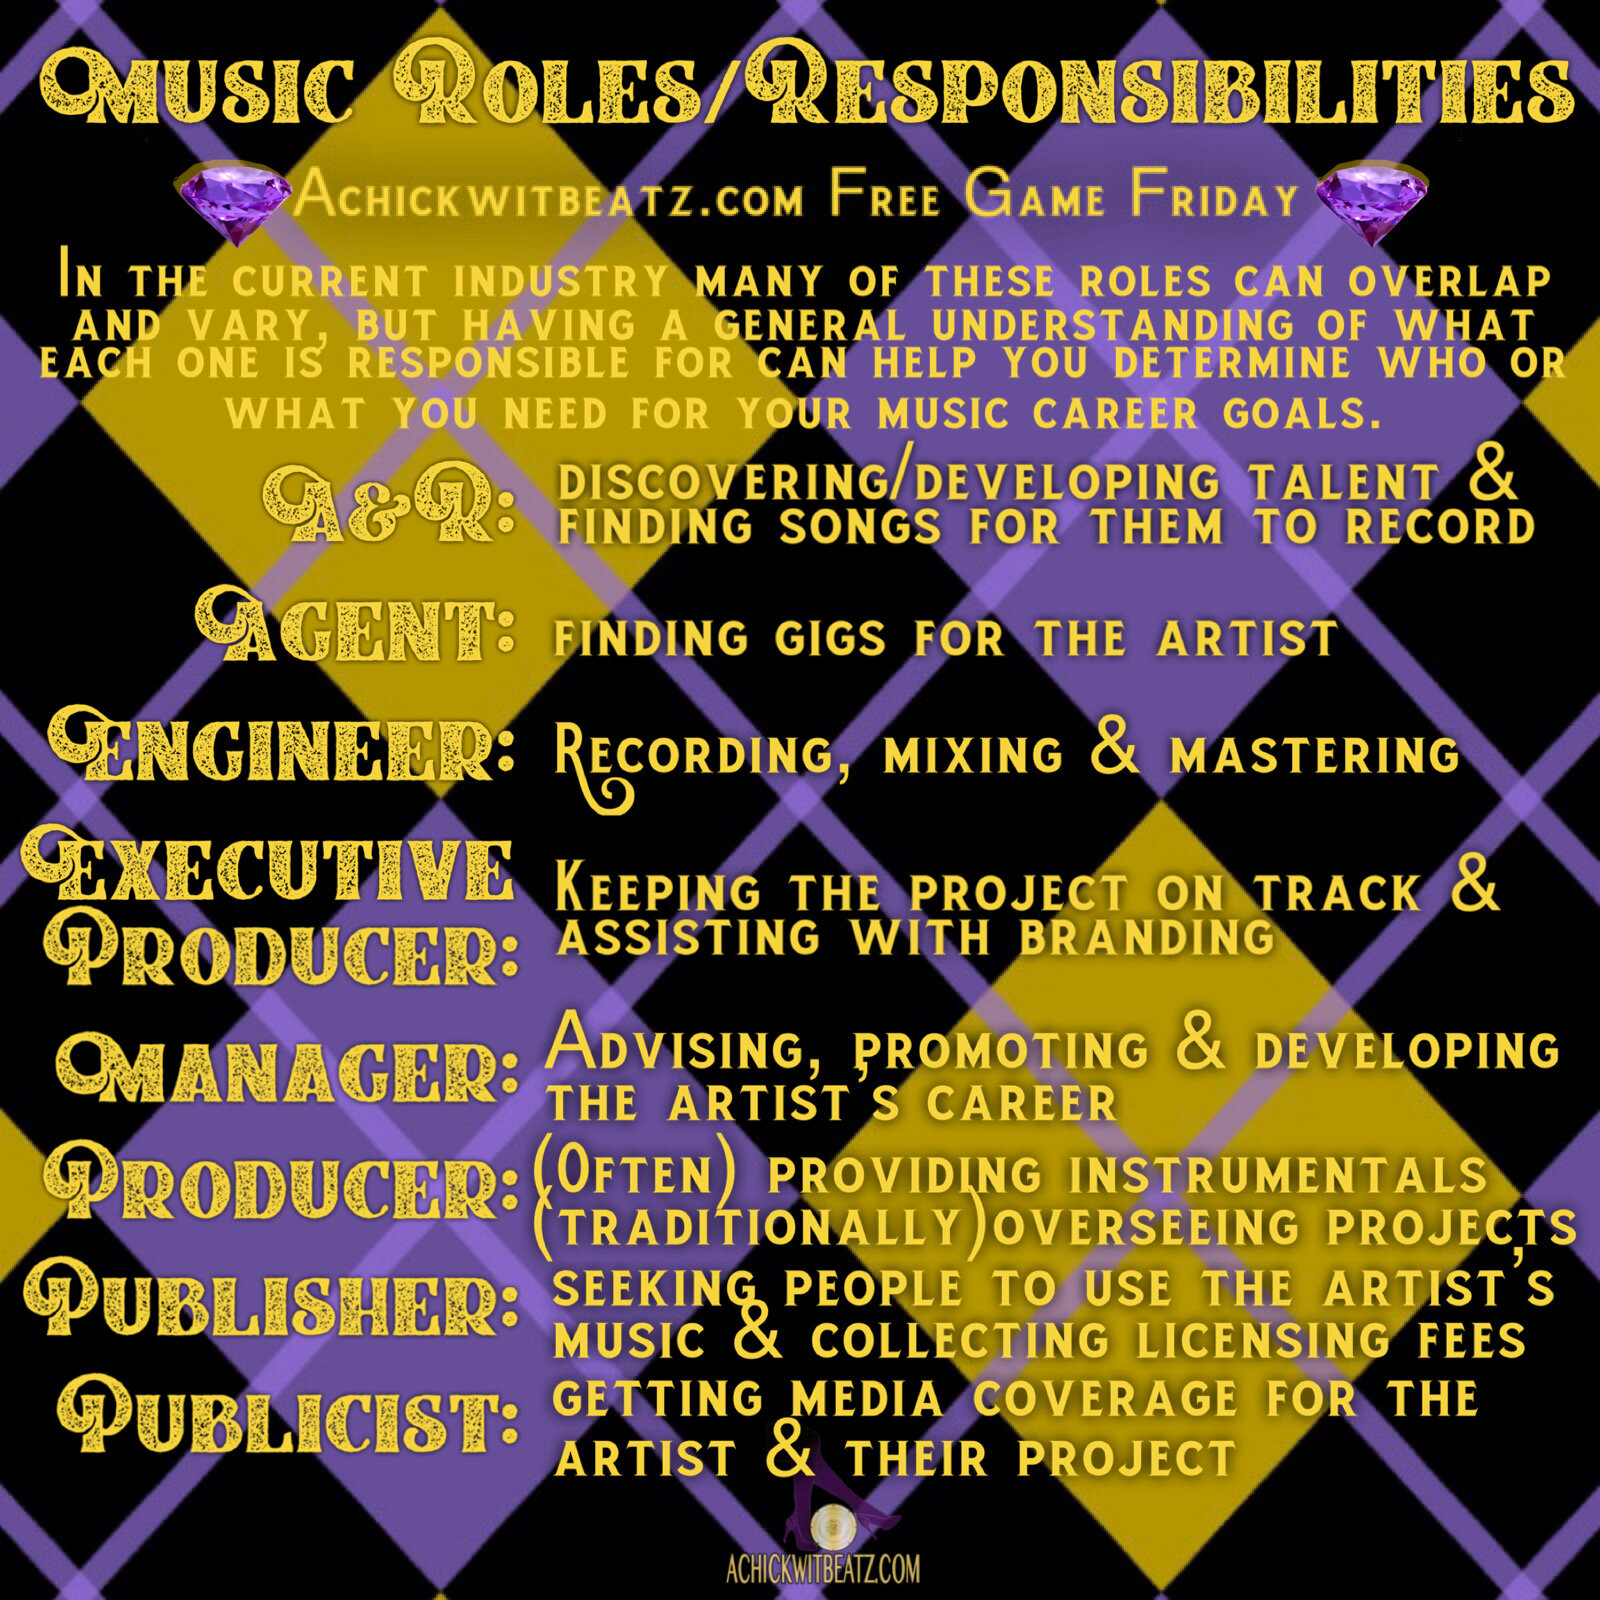 Free Game Friday: Music Roles/Responsibilities